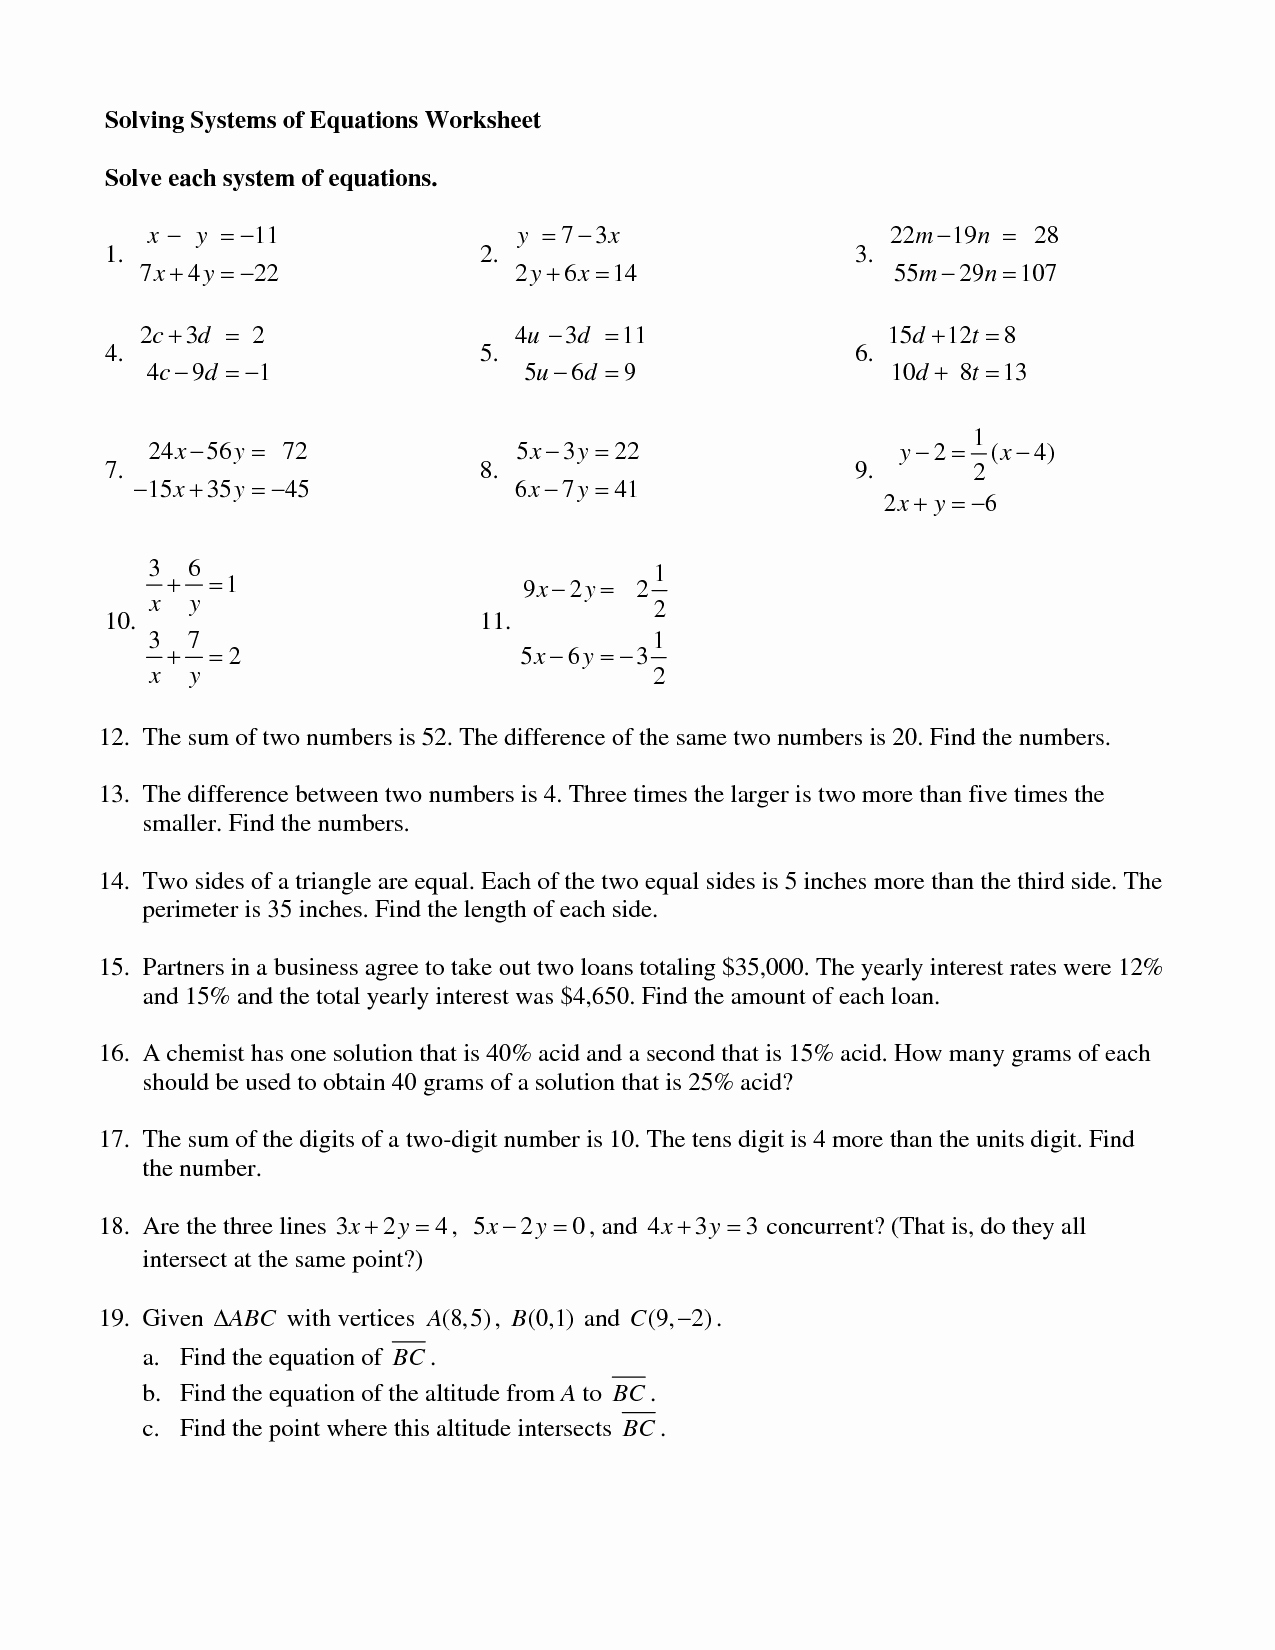 Solving Systems by Elimination Worksheet Elegant 15 Best Of Systems Equations Worksheets Printing